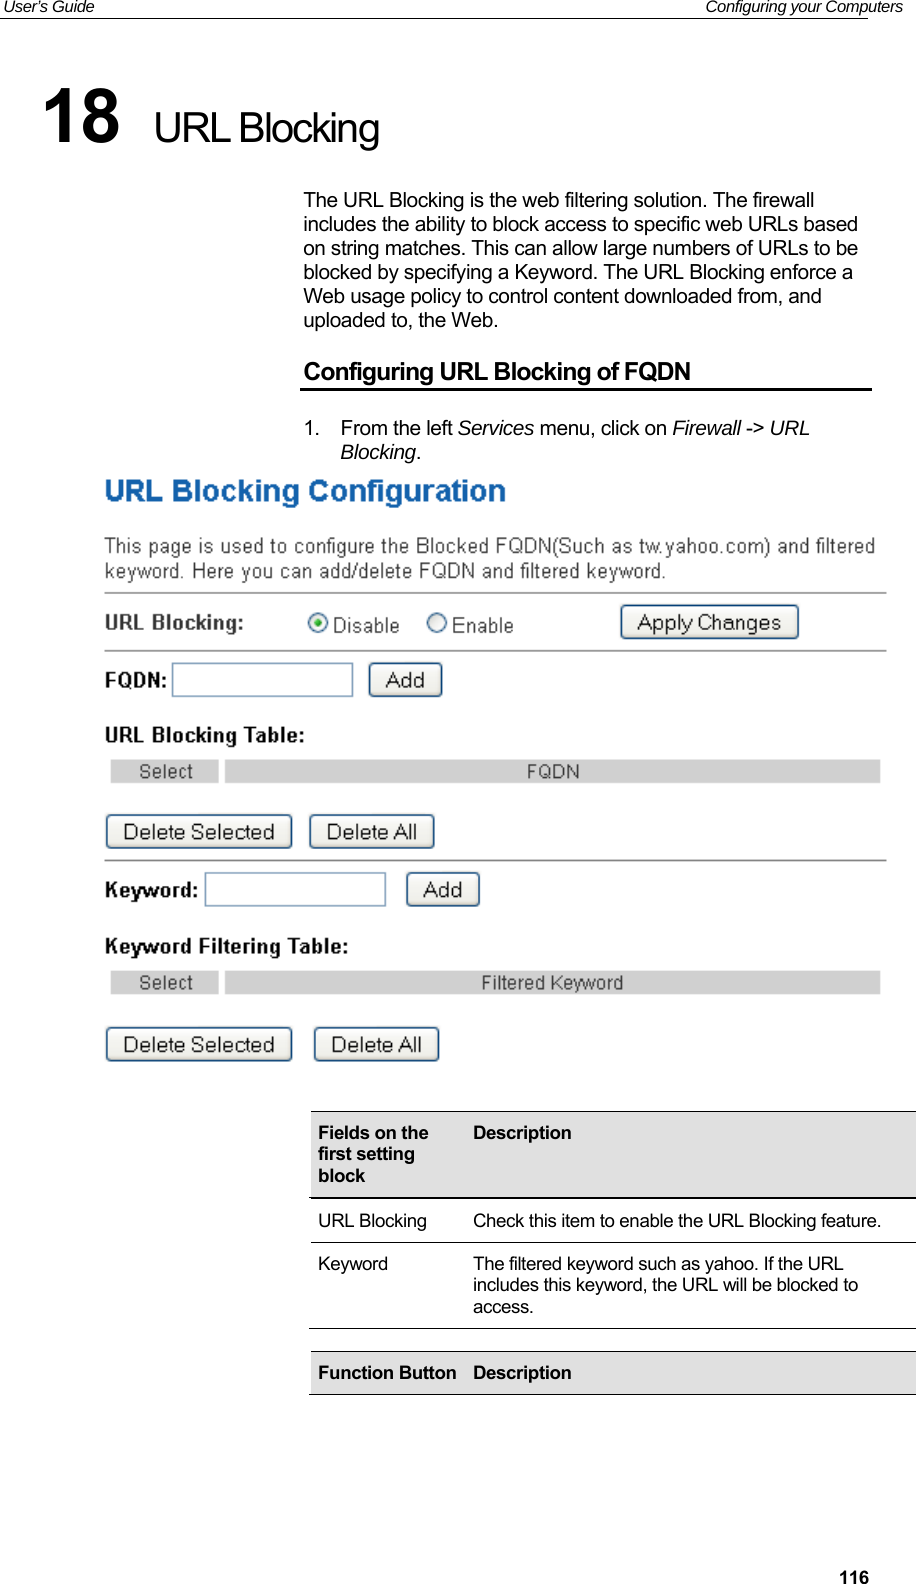 User’s Guide   Configuring your Computers  11618  URL Blocking The URL Blocking is the web filtering solution. The firewall includes the ability to block access to specific web URLs based on string matches. This can allow large numbers of URLs to be blocked by specifying a Keyword. The URL Blocking enforce a Web usage policy to control content downloaded from, and uploaded to, the Web. Configuring URL Blocking of FQDN 1.  From the left Services menu, click on Firewall -&gt; URL Blocking.            Fields on the first setting block Description URL Blocking  Check this item to enable the URL Blocking feature. Keyword  The filtered keyword such as yahoo. If the URL includes this keyword, the URL will be blocked to access. Function Button Description 